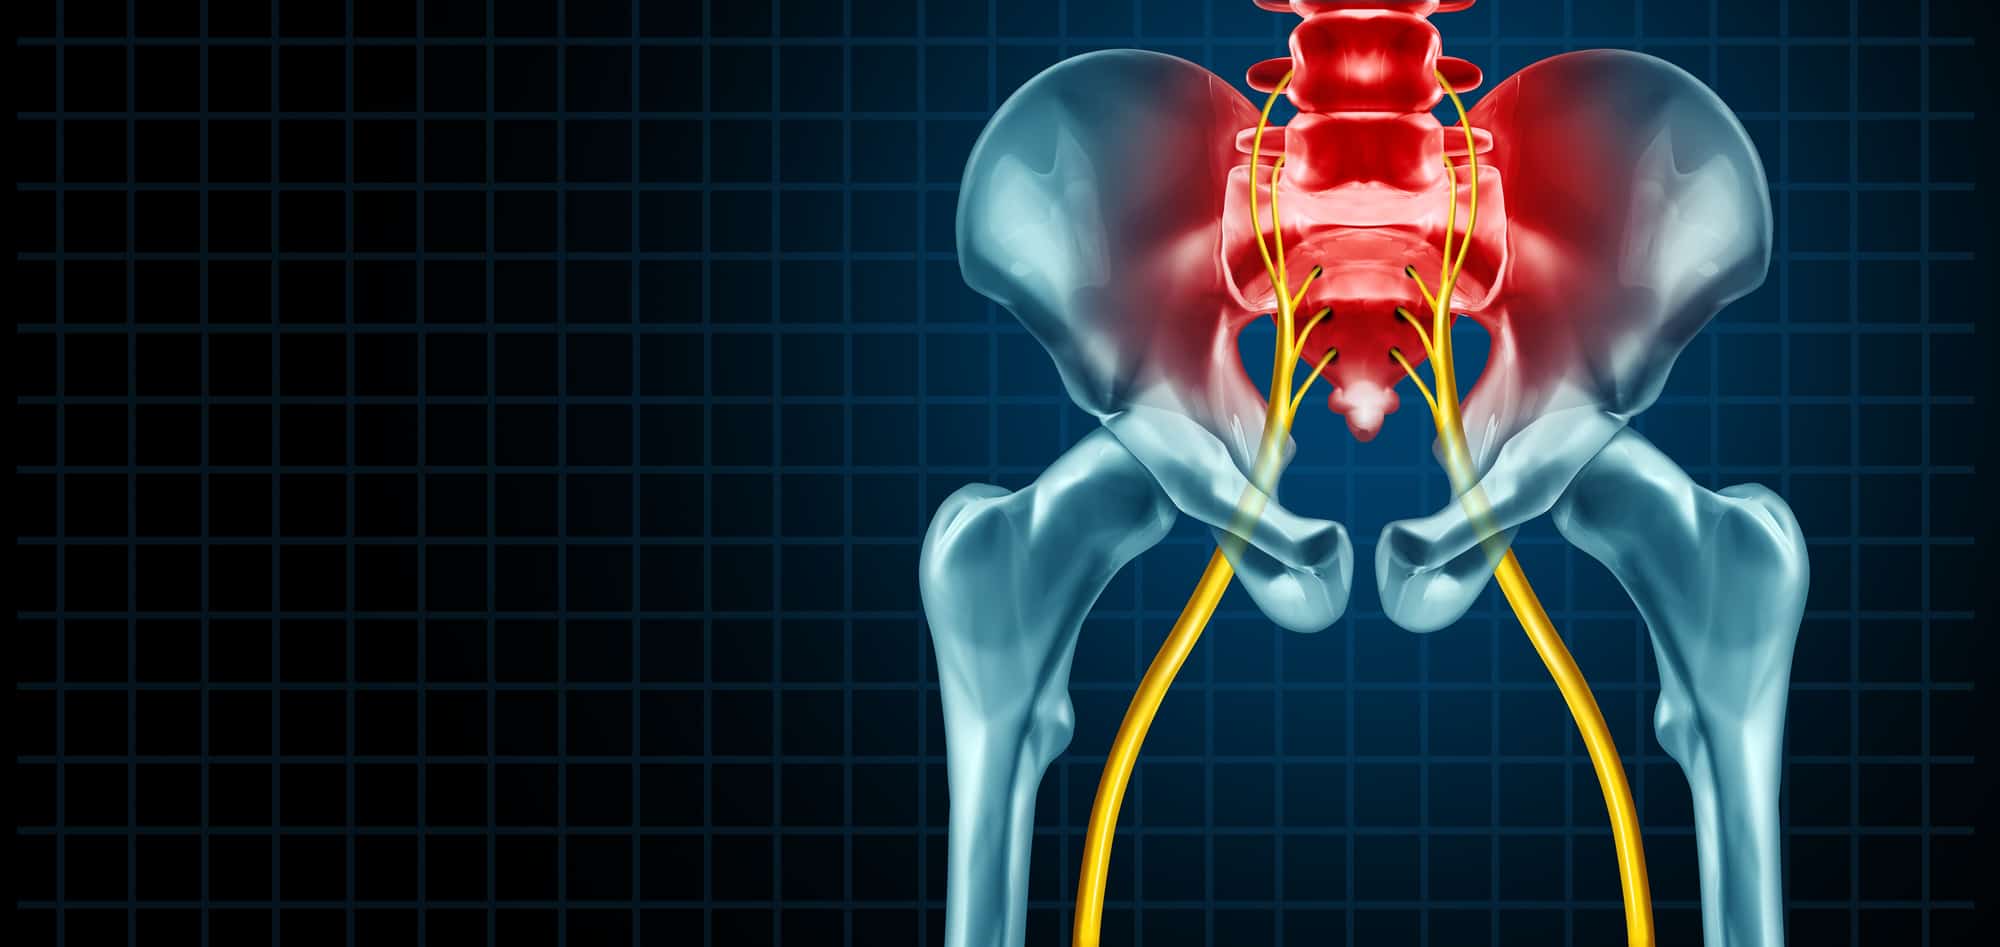 Can I Relieve Pain Caused by Sciatica With Myofascial Release?